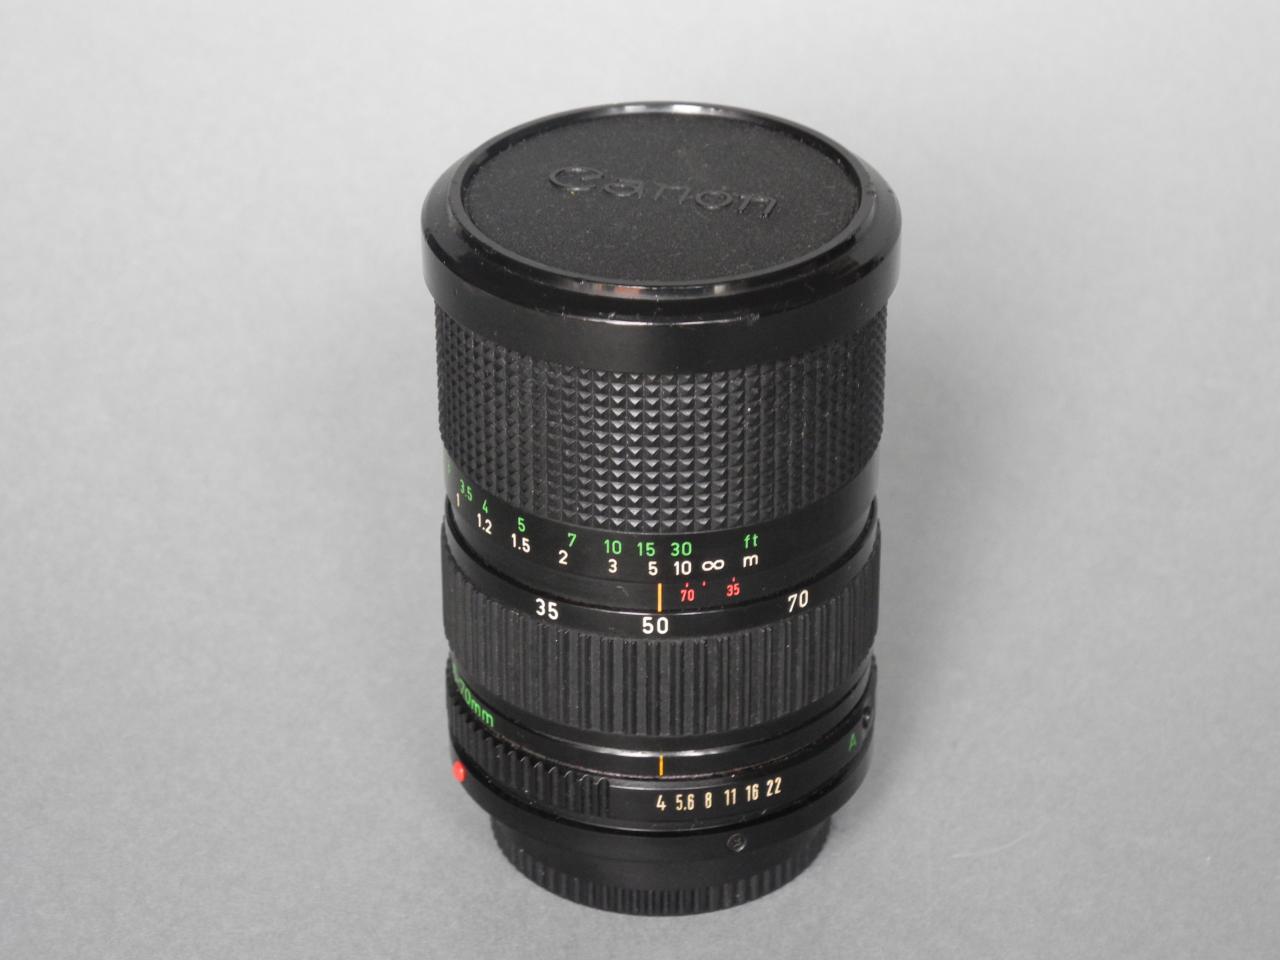 *Objectif zoom f/4: 3.5-70mm Canon*